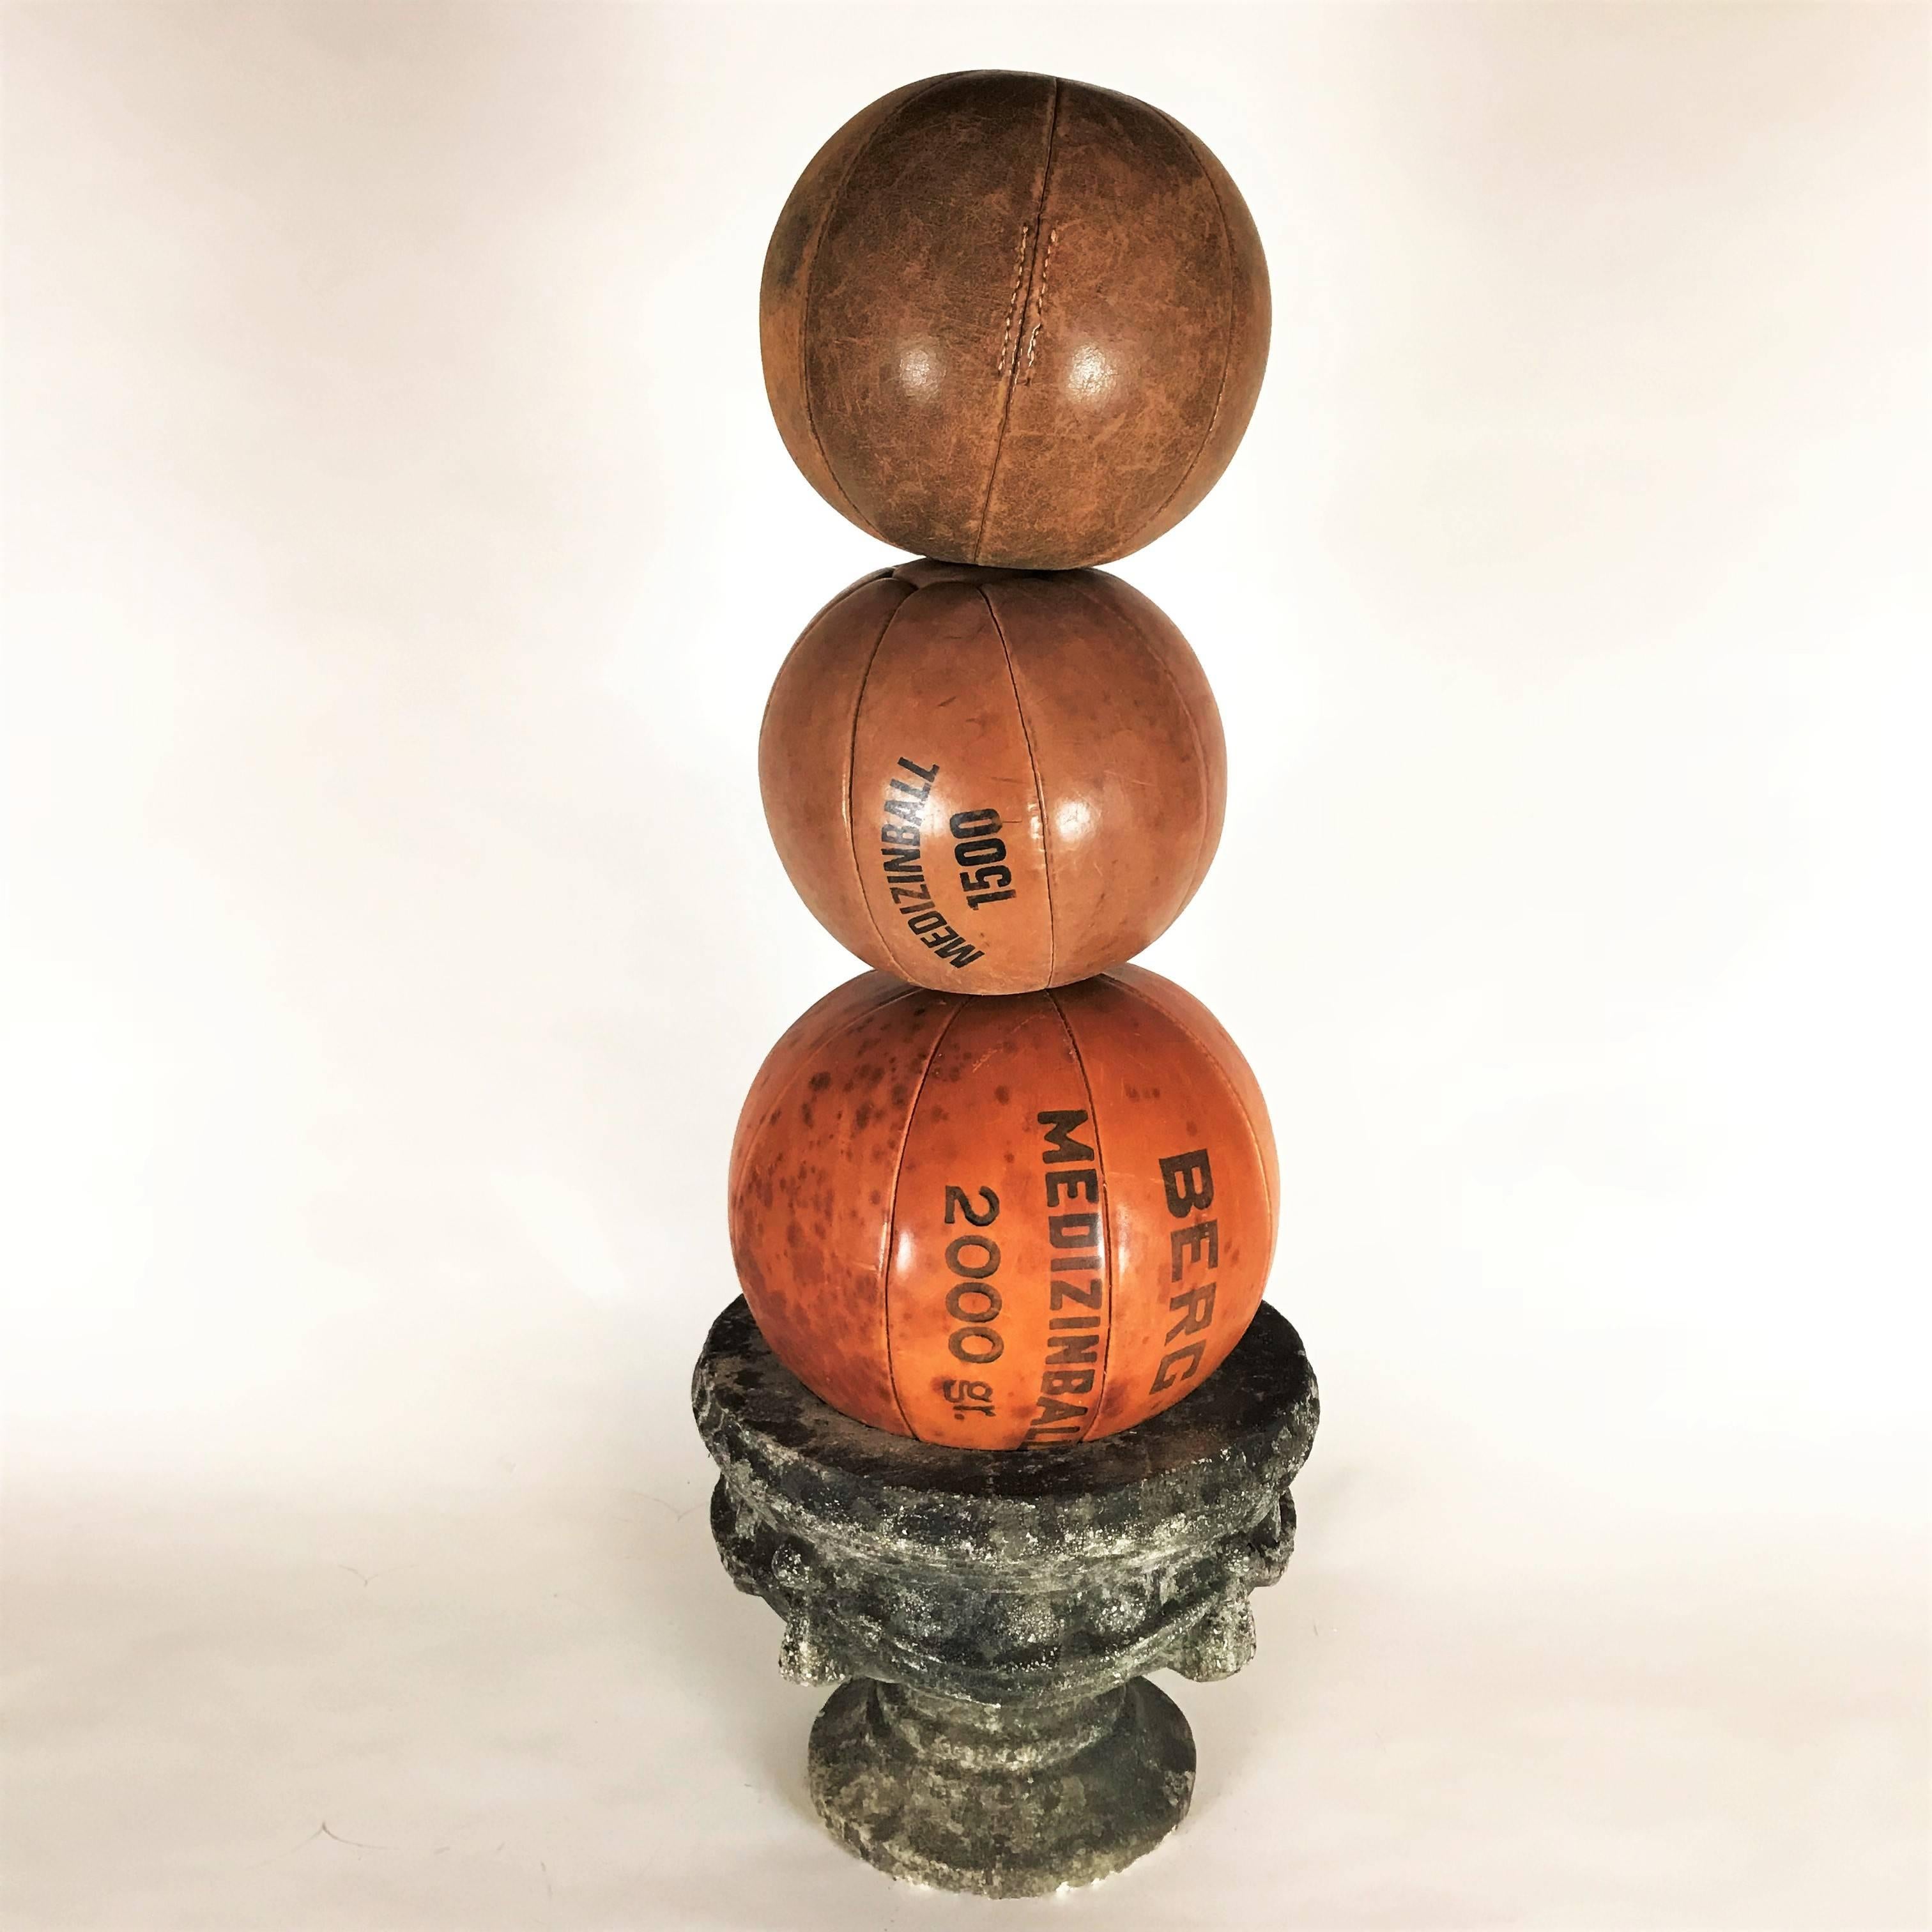 The medicine balls are part of a big collection from the 1920s-1930s, the time of the first gym enthusiasts in Germany.
The balls are handmade and filled with horse hair.
All balls are in a very good condition with nice patina and an intense